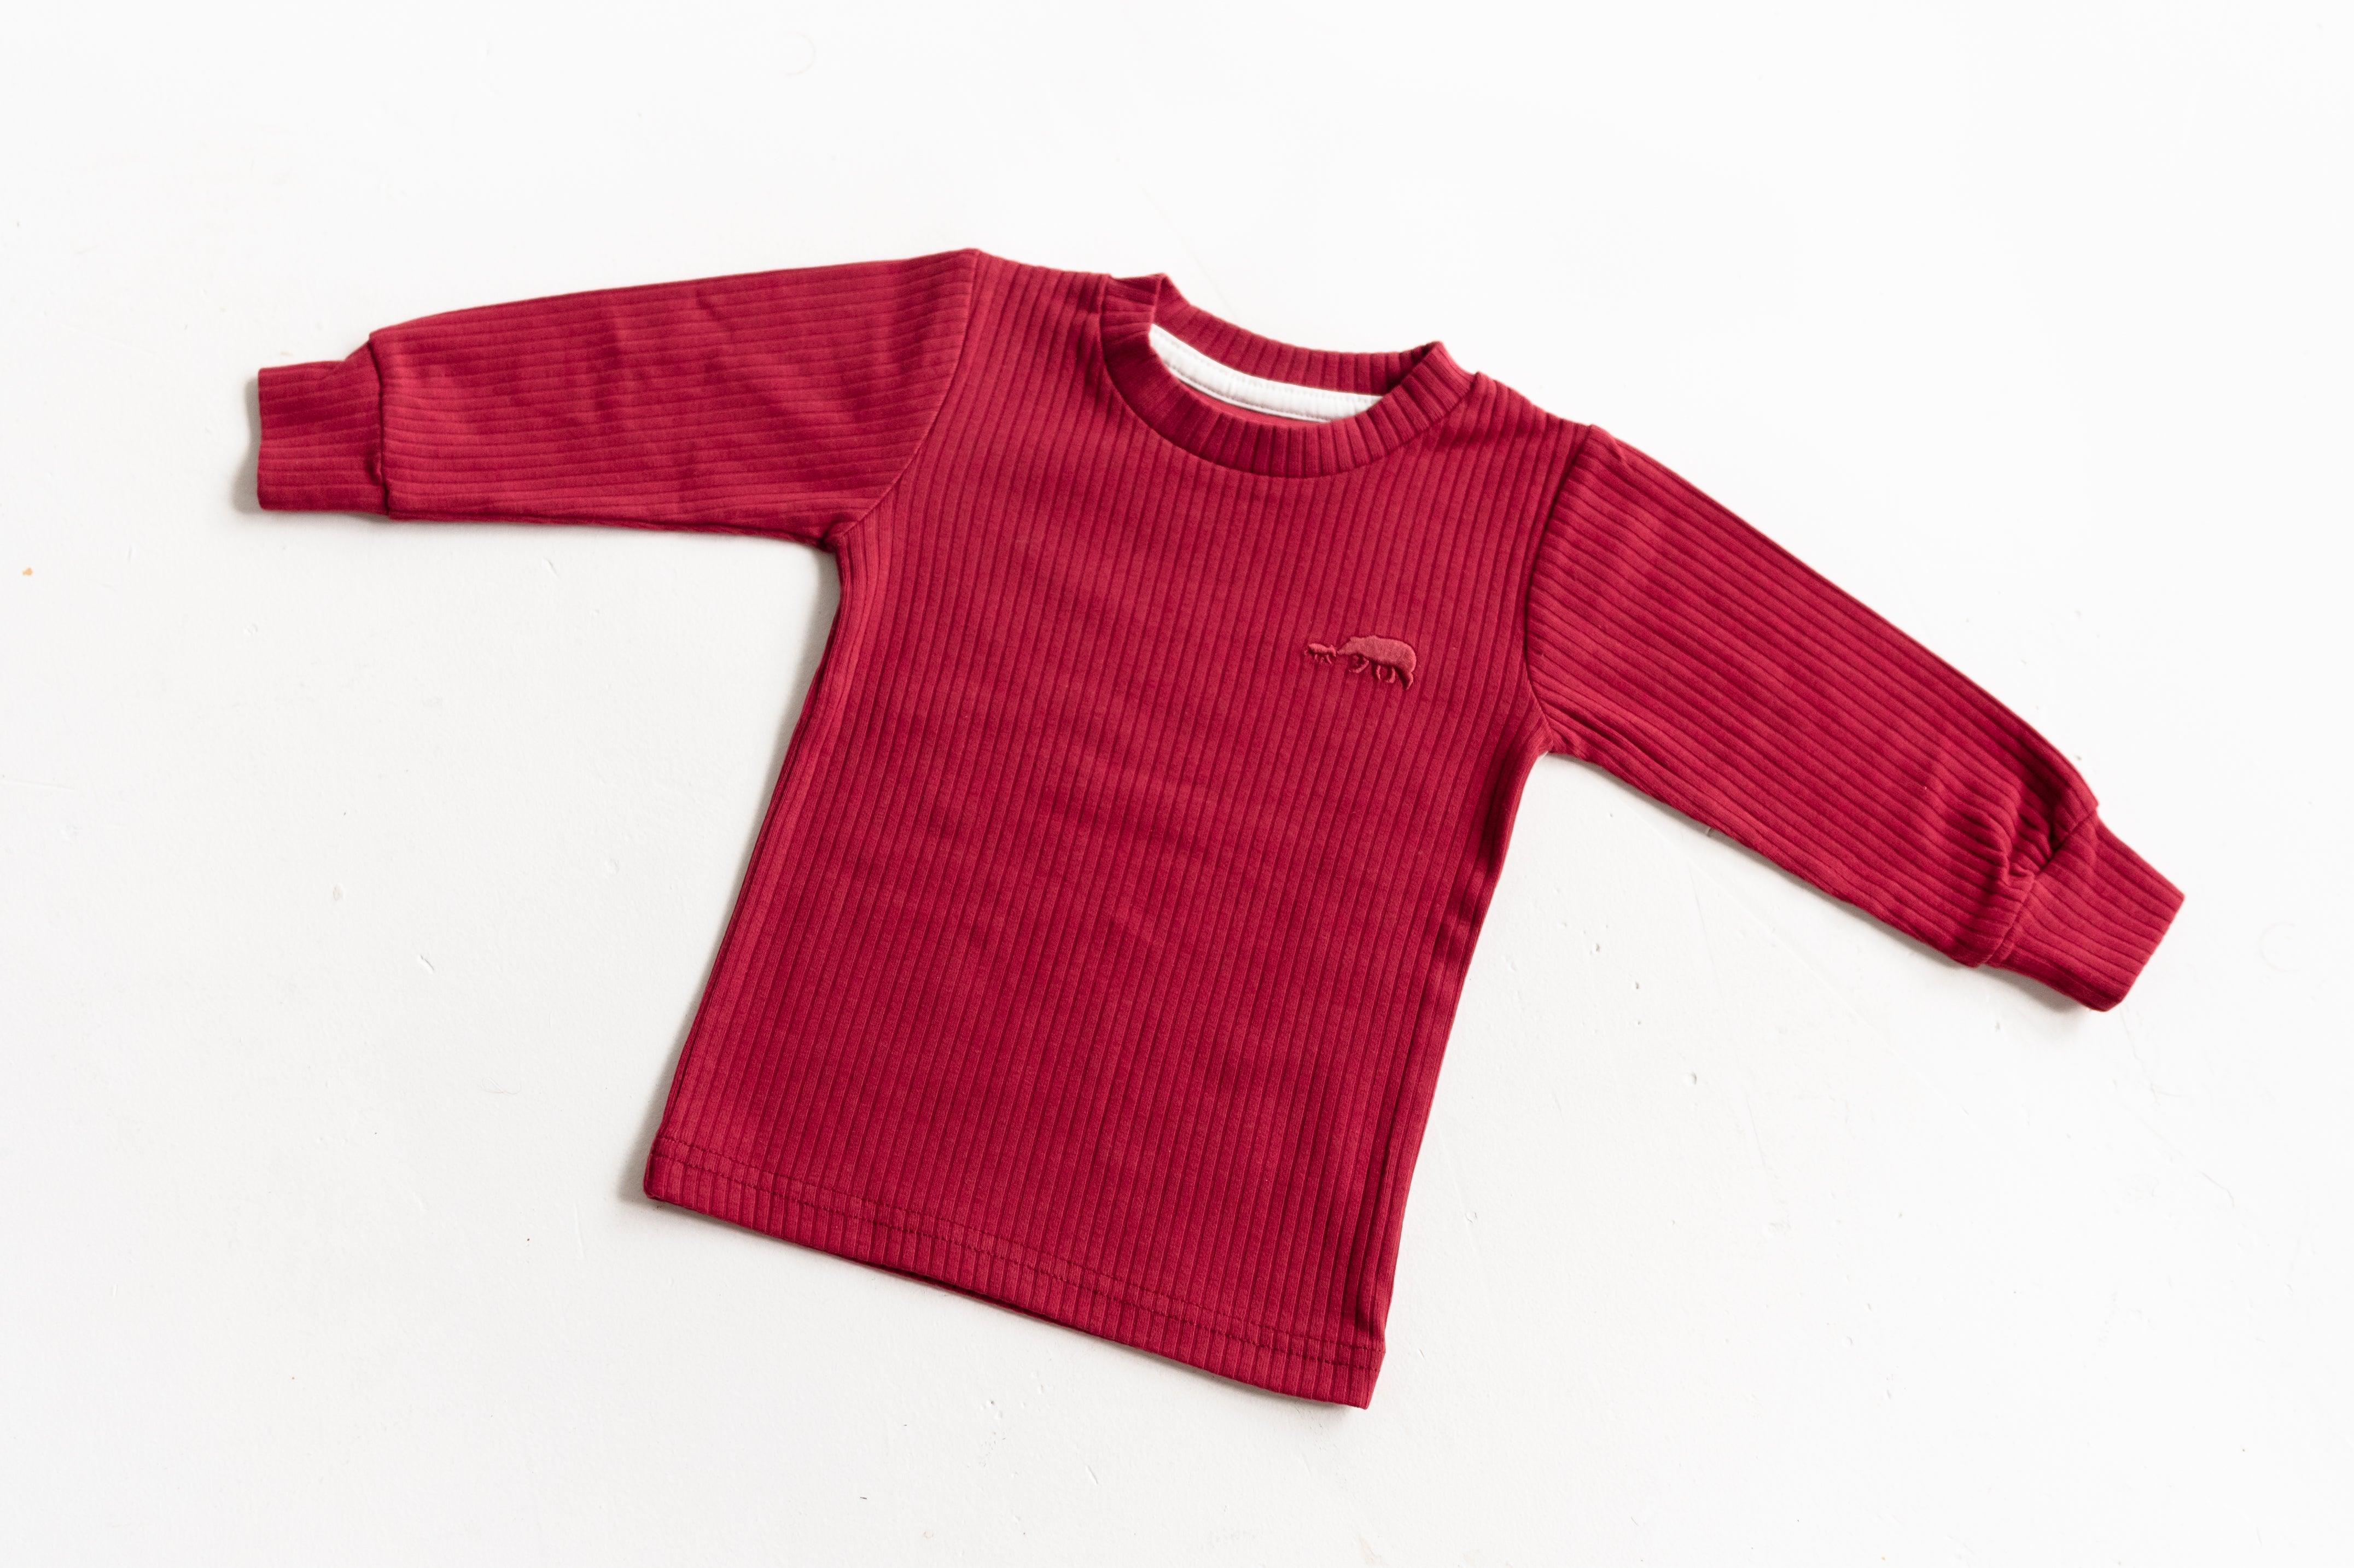 files/dark-red-ribbed-long-sleeve-top-claybearofficial-2_438f33b0-019e-44a8-bdc0-0d05770caf31.jpg